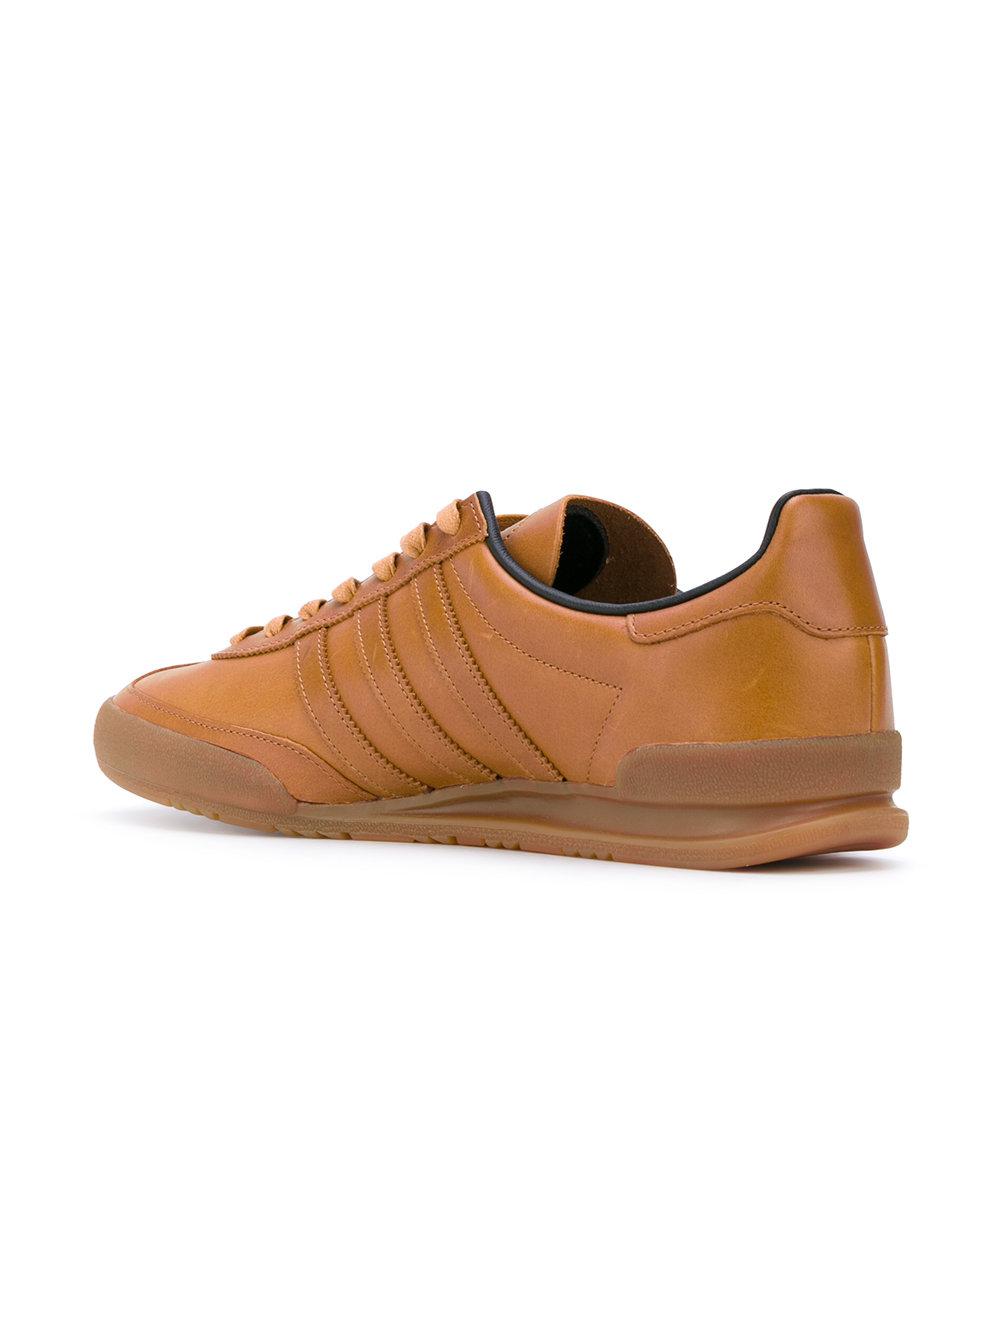 adidas Jeans Mkii Sneakers Brown for Men | Lyst